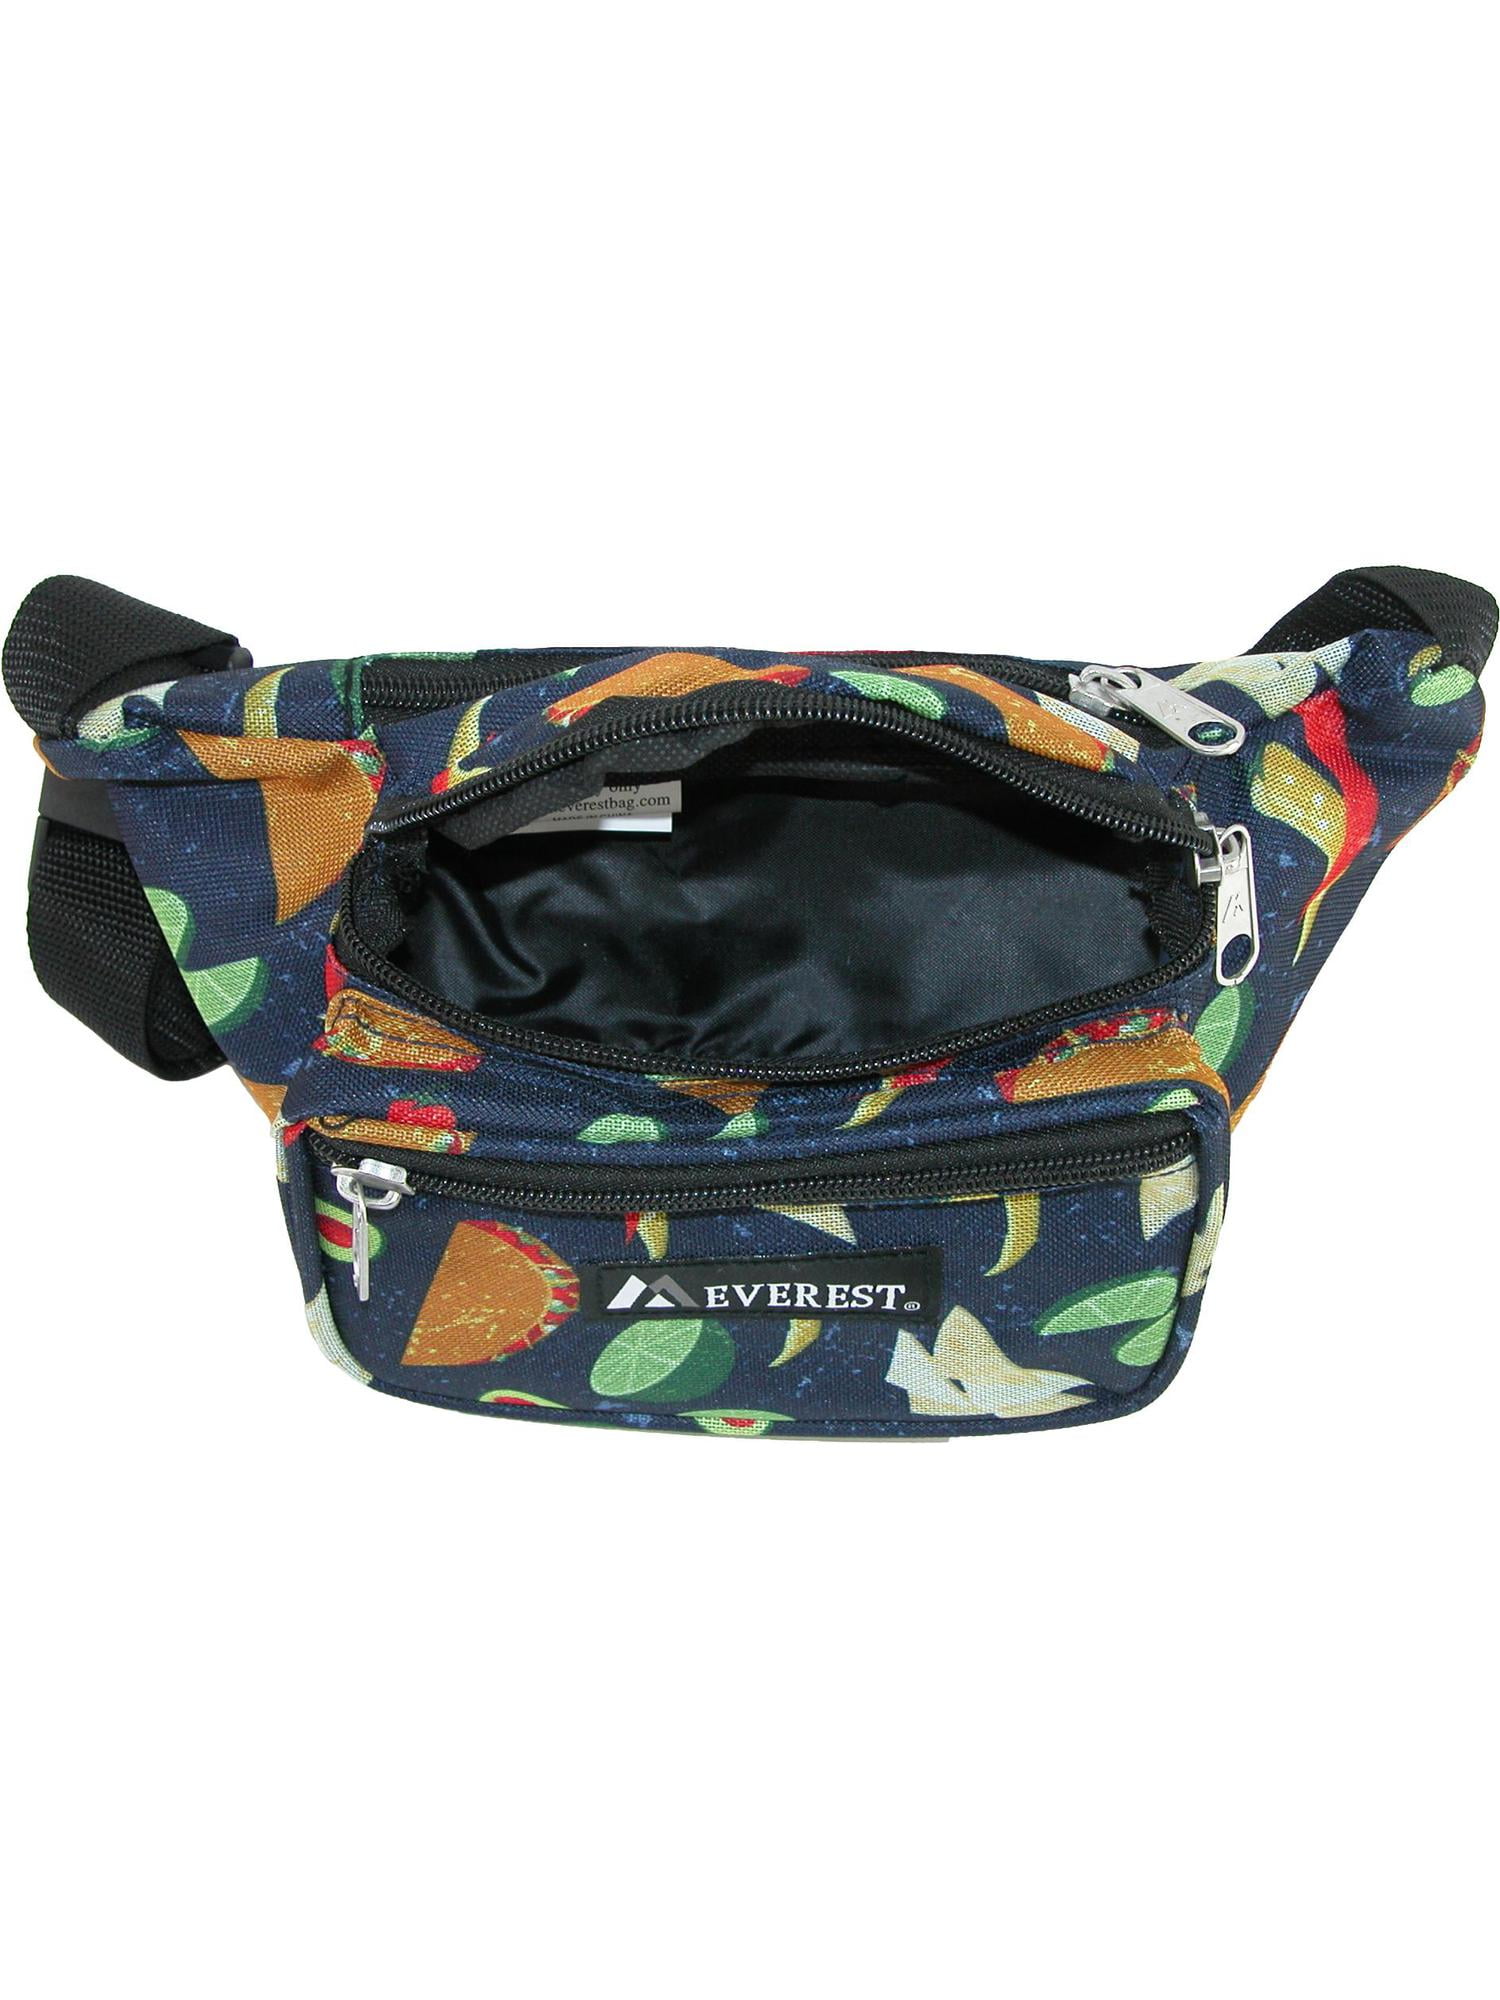 Everest Signature Pattern Waist Pack One Size Tacos